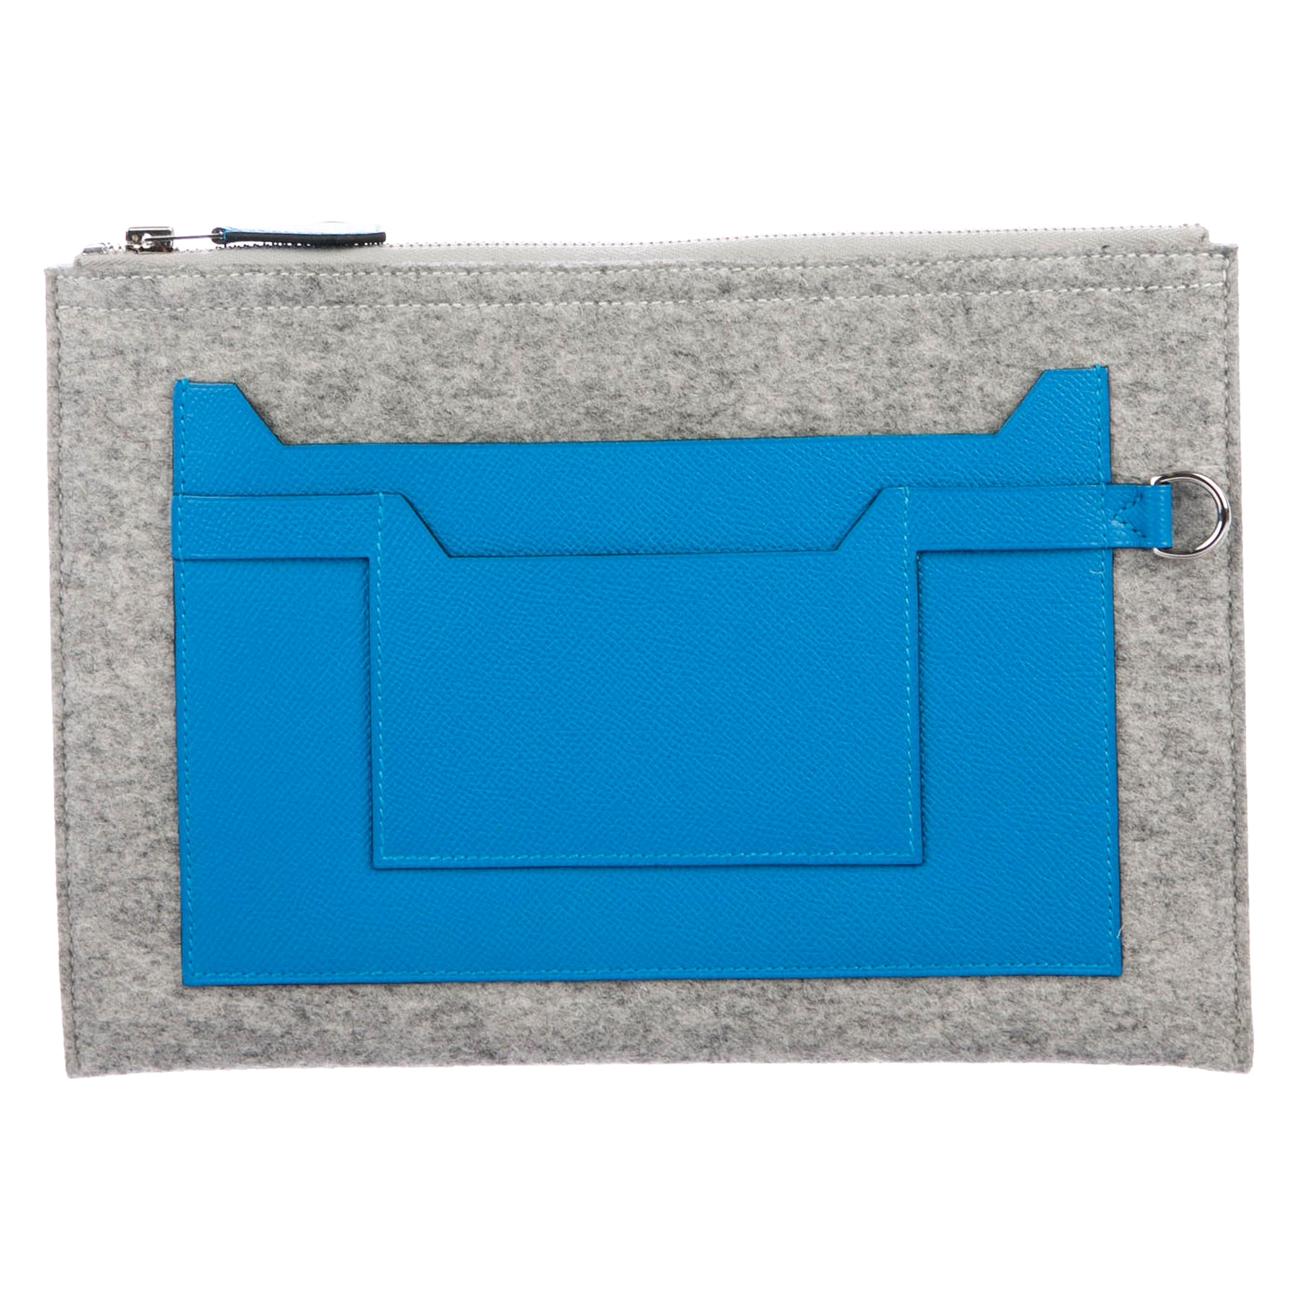 Hermes NEW Gray Wool Felt Blue Leather Evening Travel Cosmetic Clutch Bag